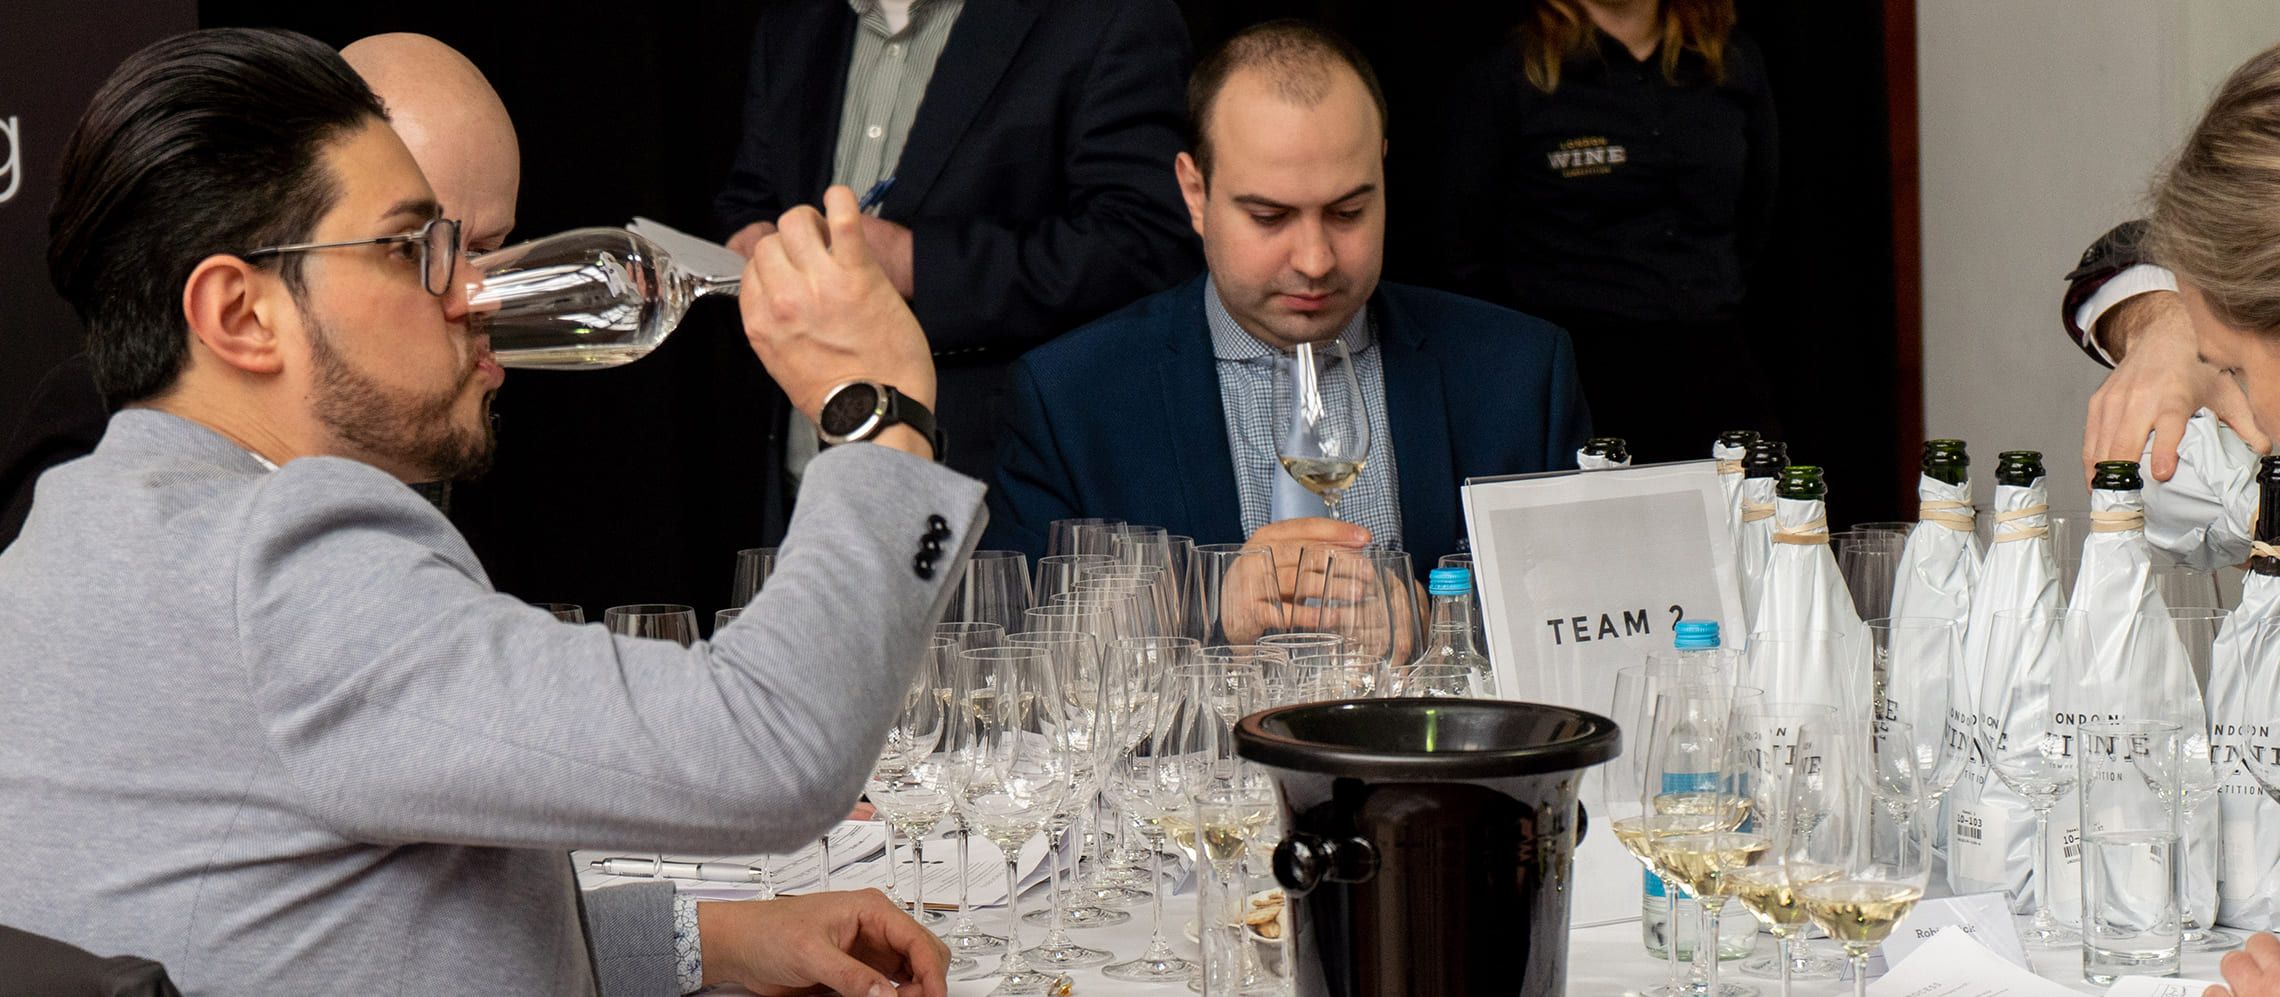 Photo for: Last Day To Enter Your Wines in the 2020 London Wine Competition